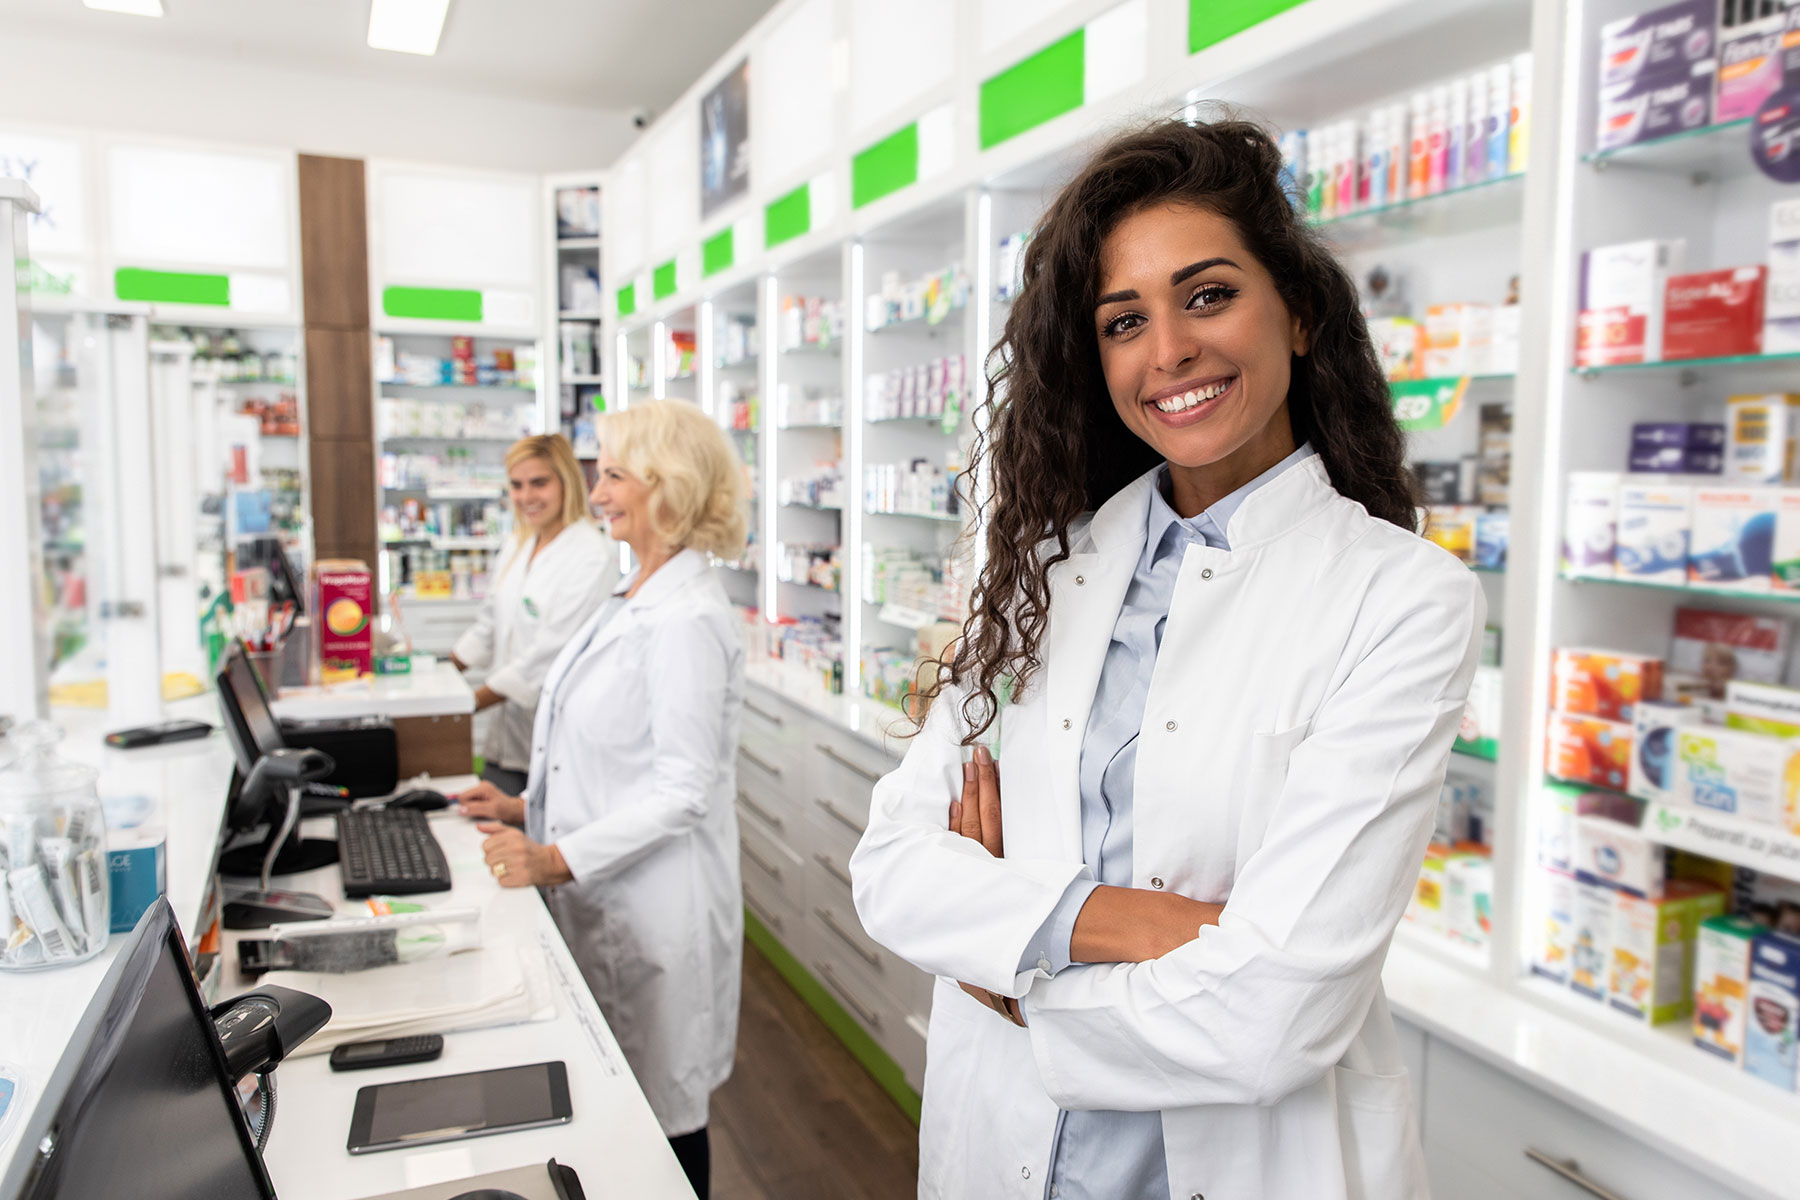 Requirements to Become a Pharmacist